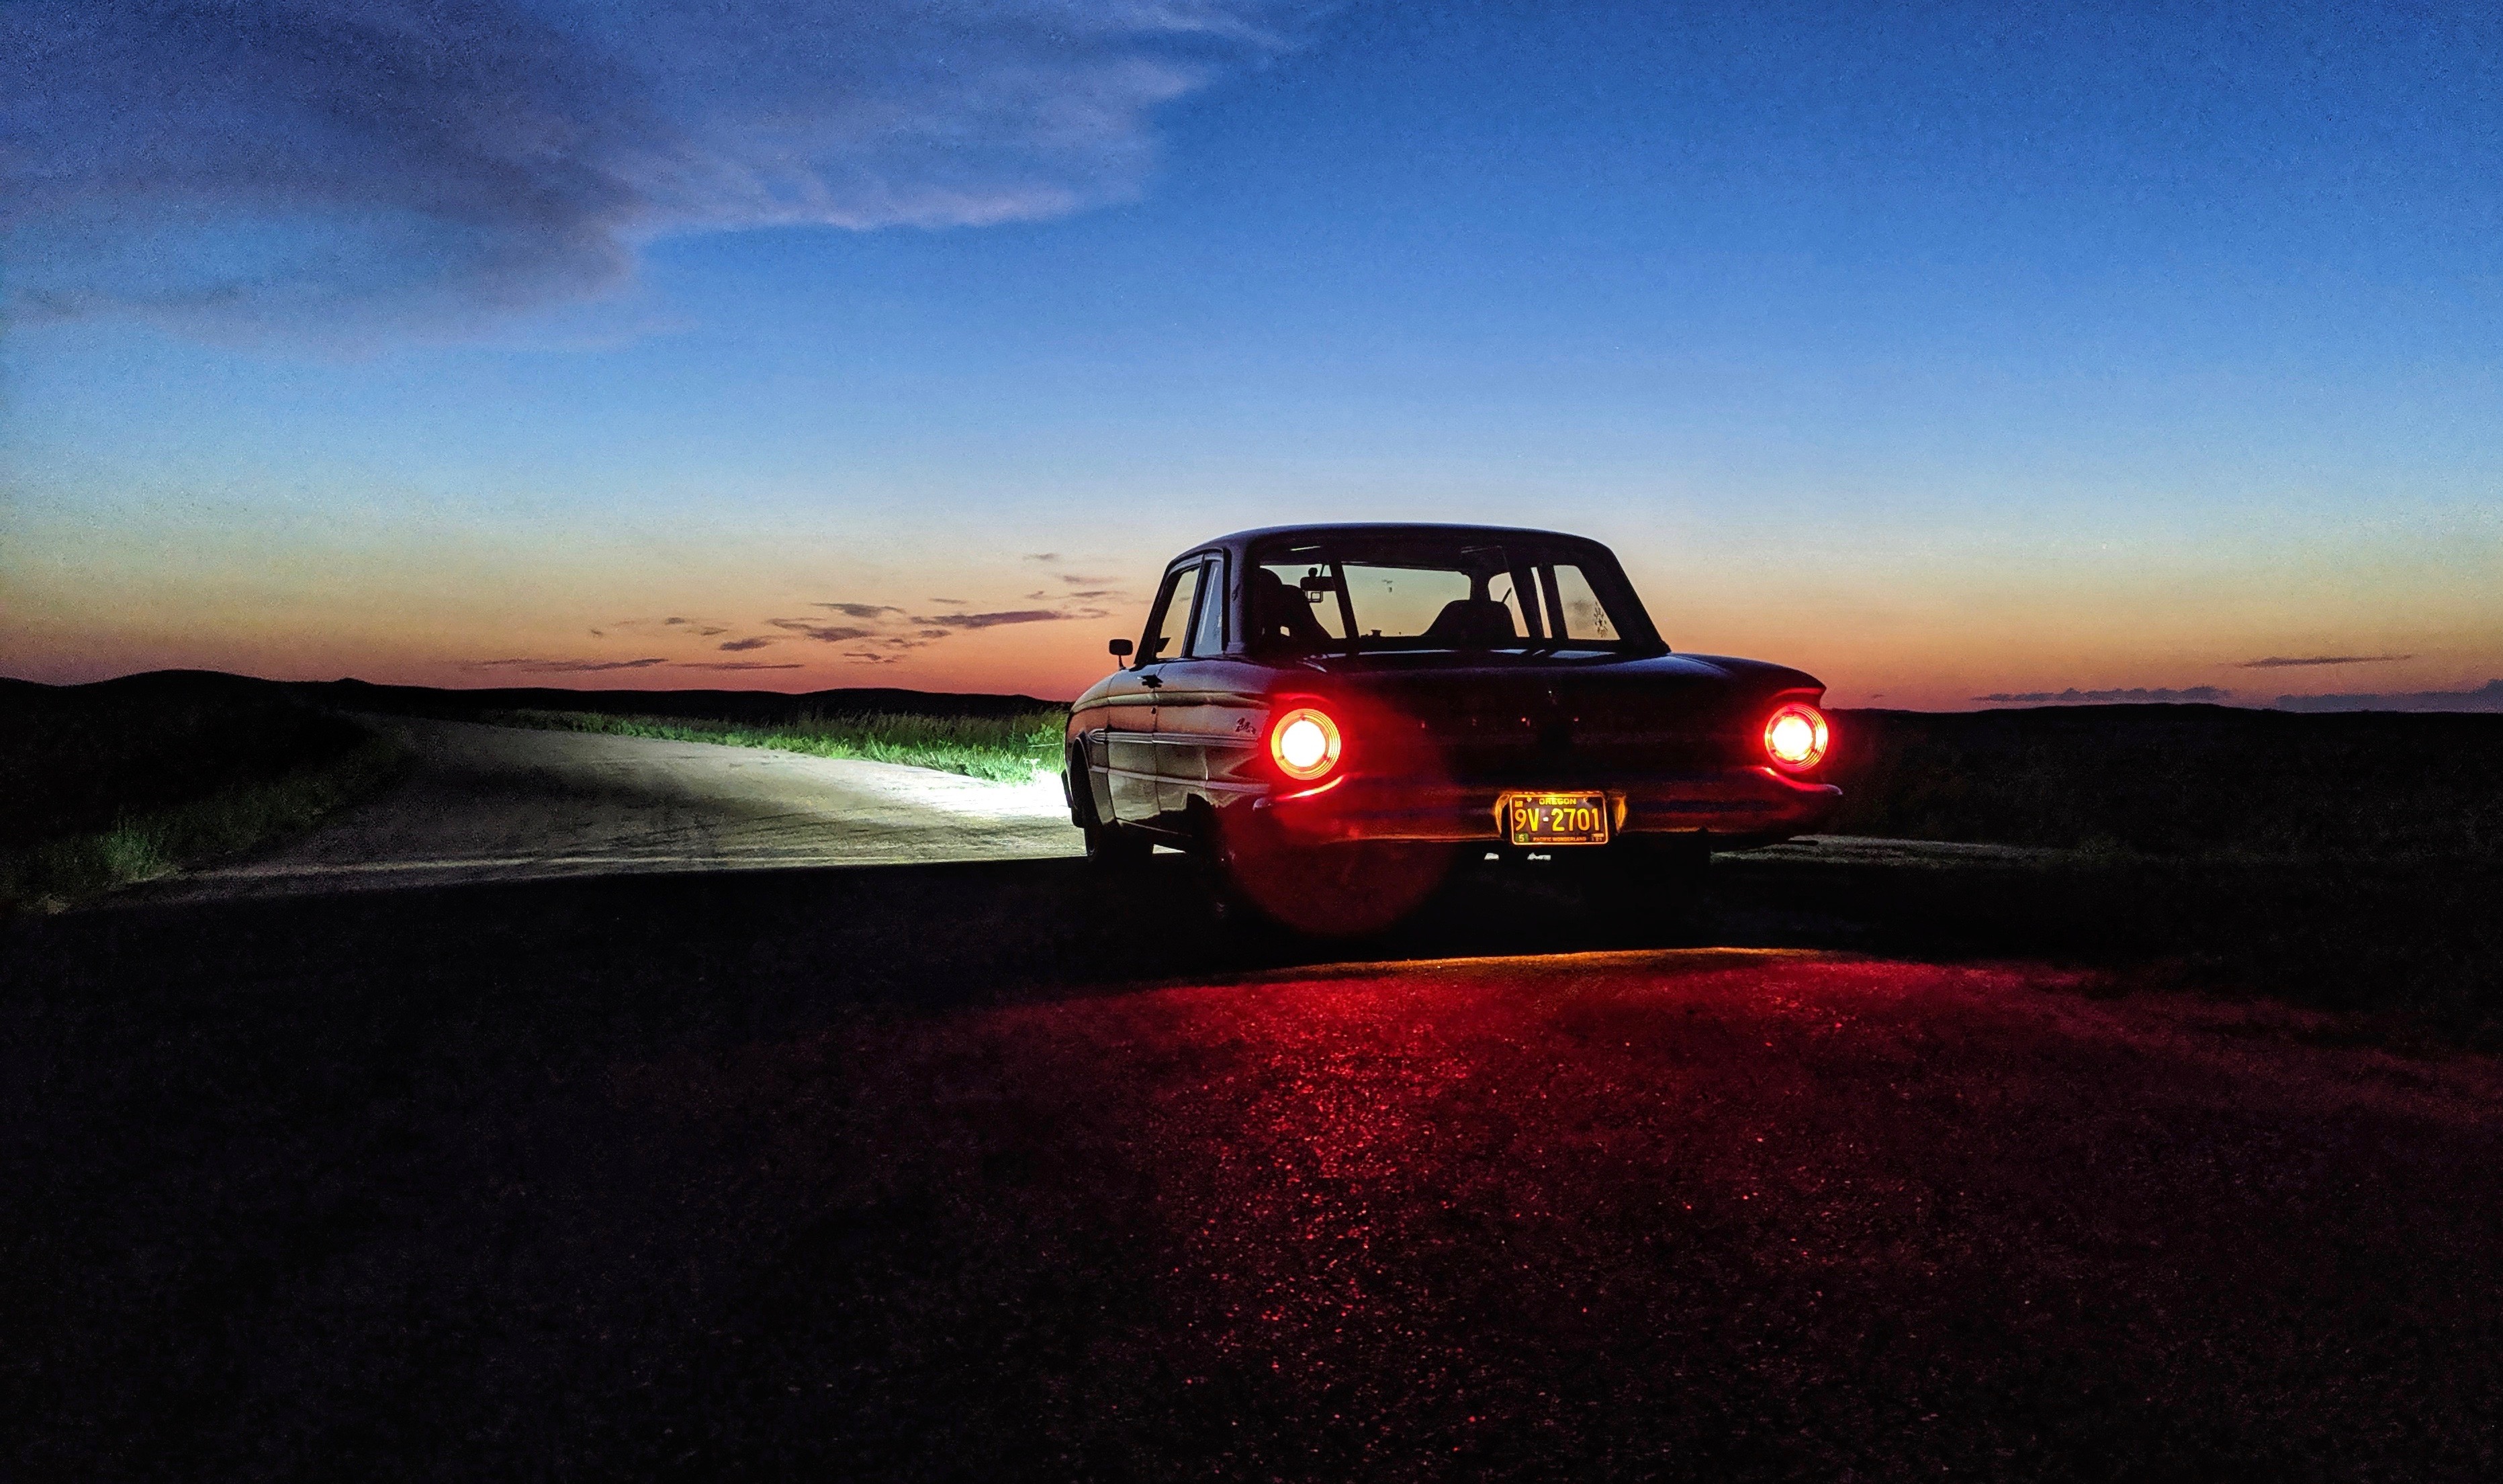 1963 Ford Falcon, Hand-controlled 1963 Falcon flies along stretch of Nebraska roadway, ClassicCars.com Journal